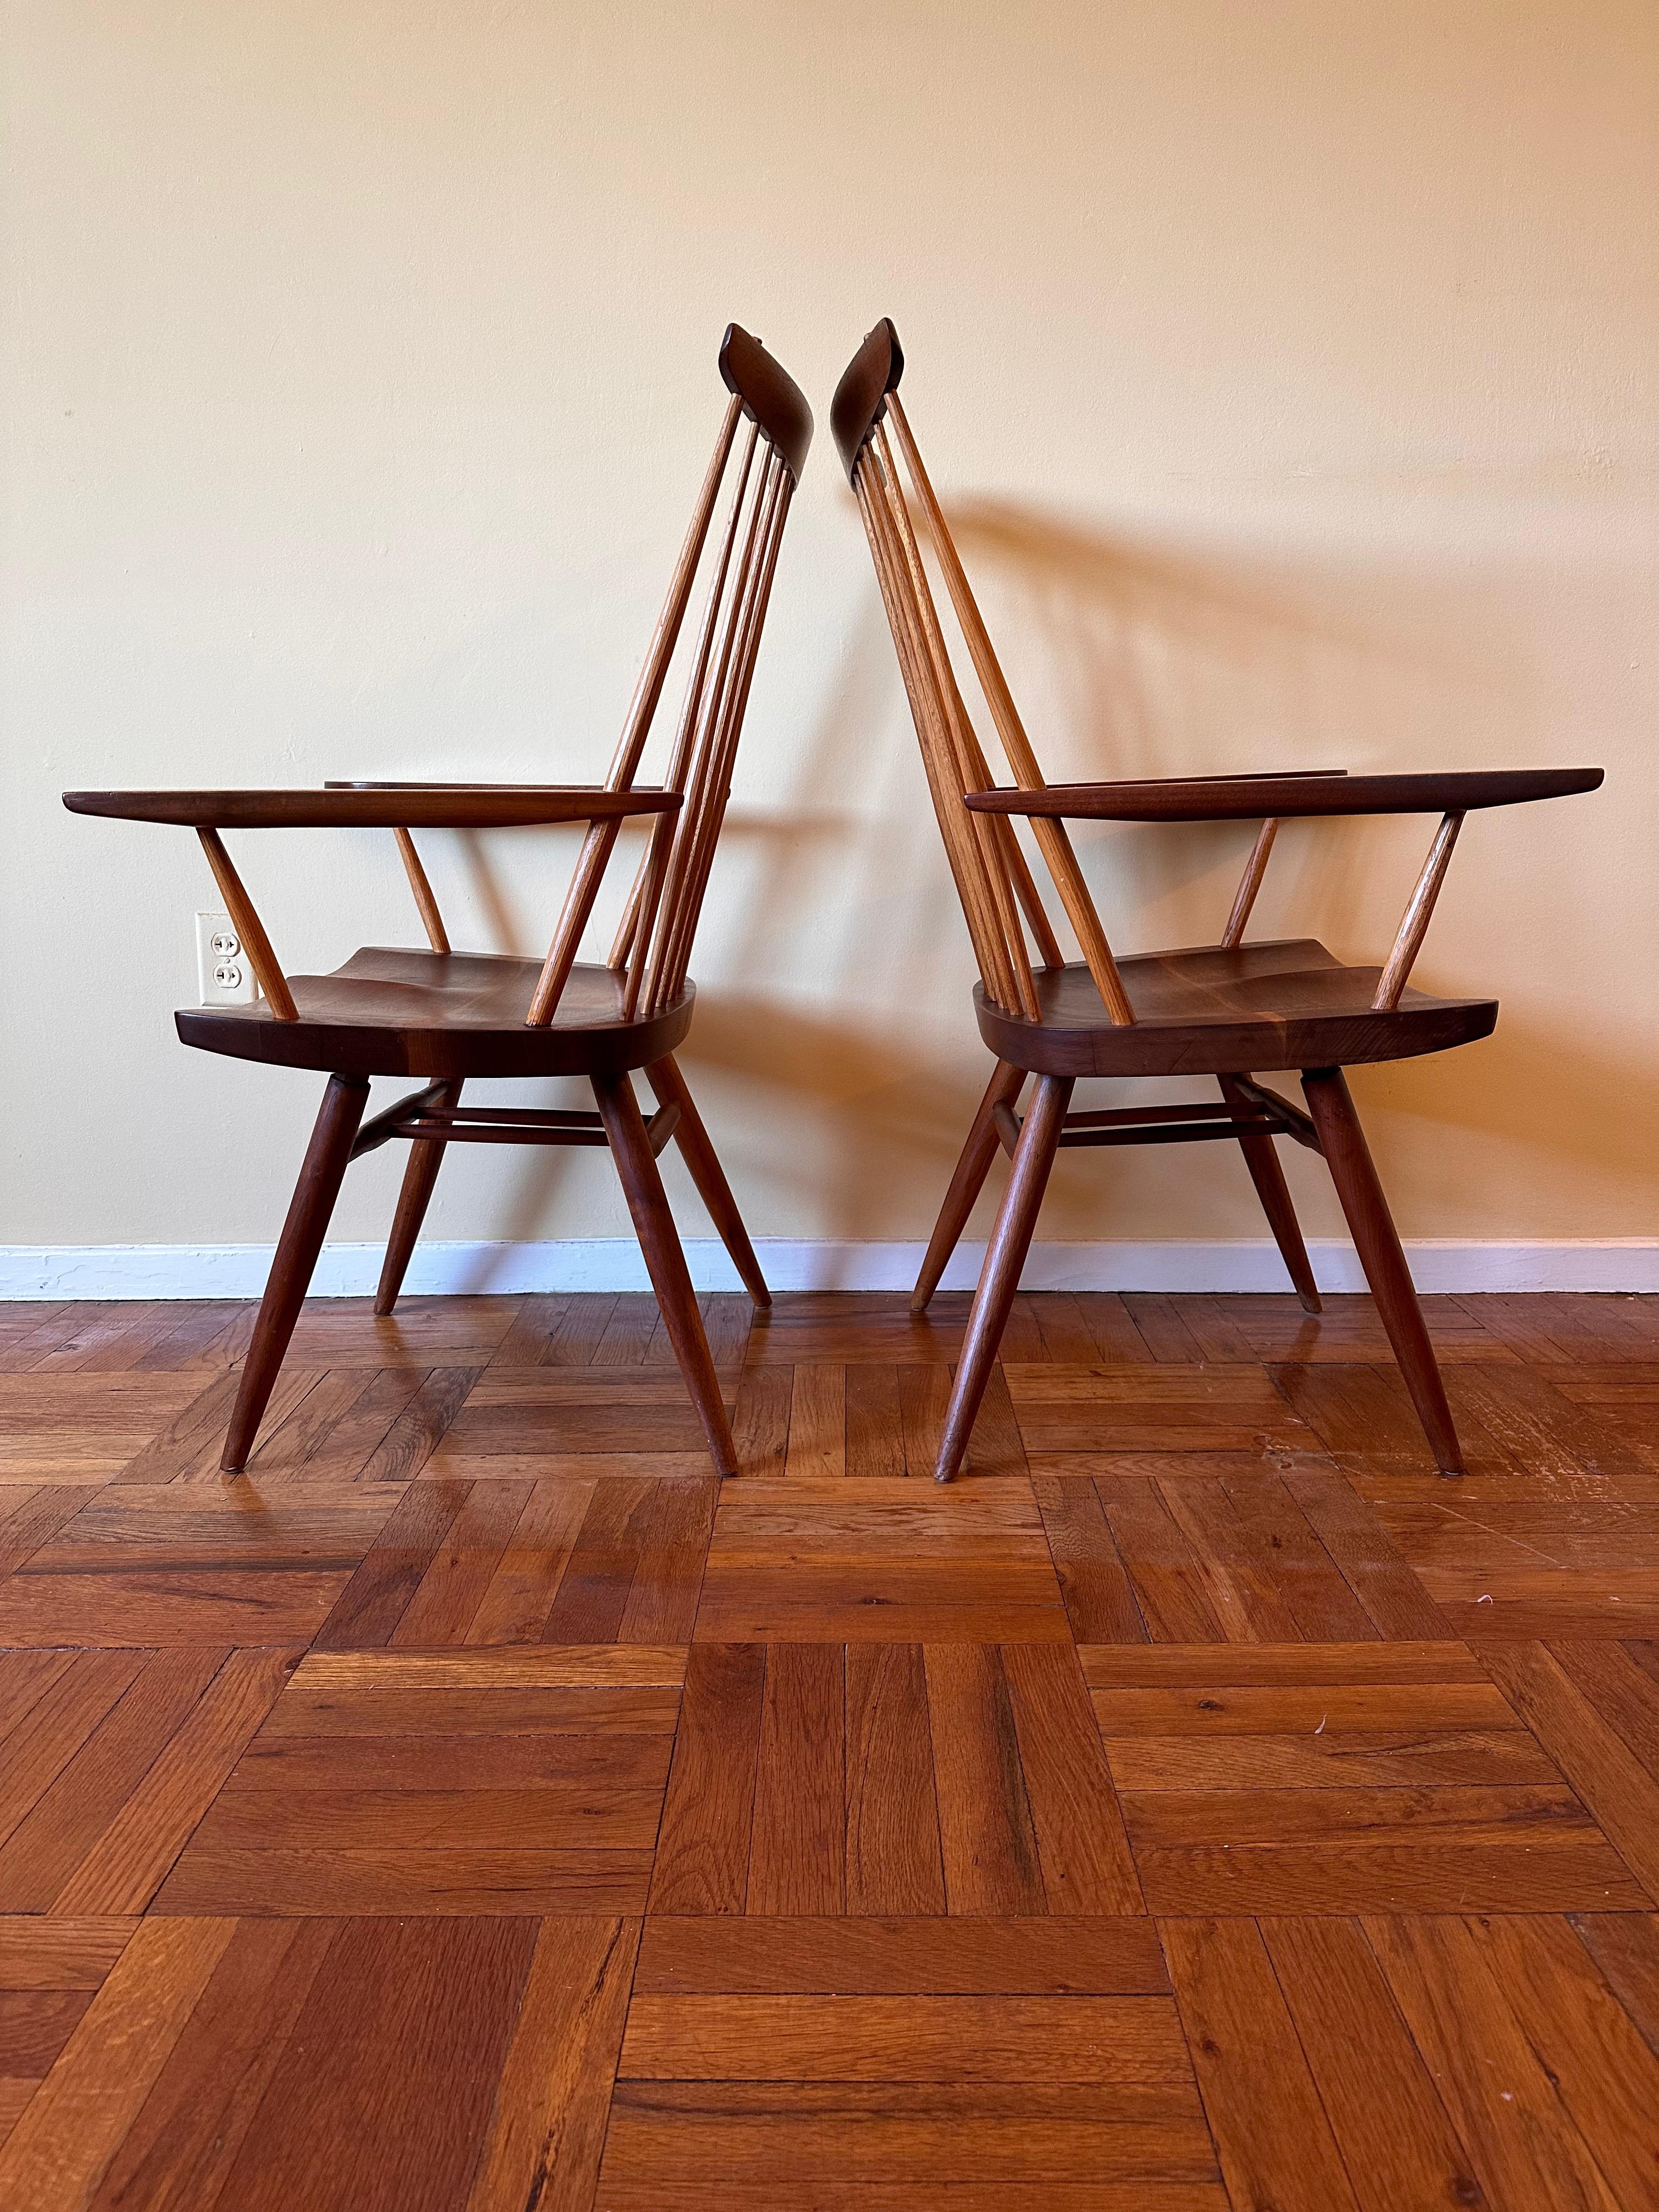 North American Set of Six New Chairs in Walnut by George Nakashima 1978